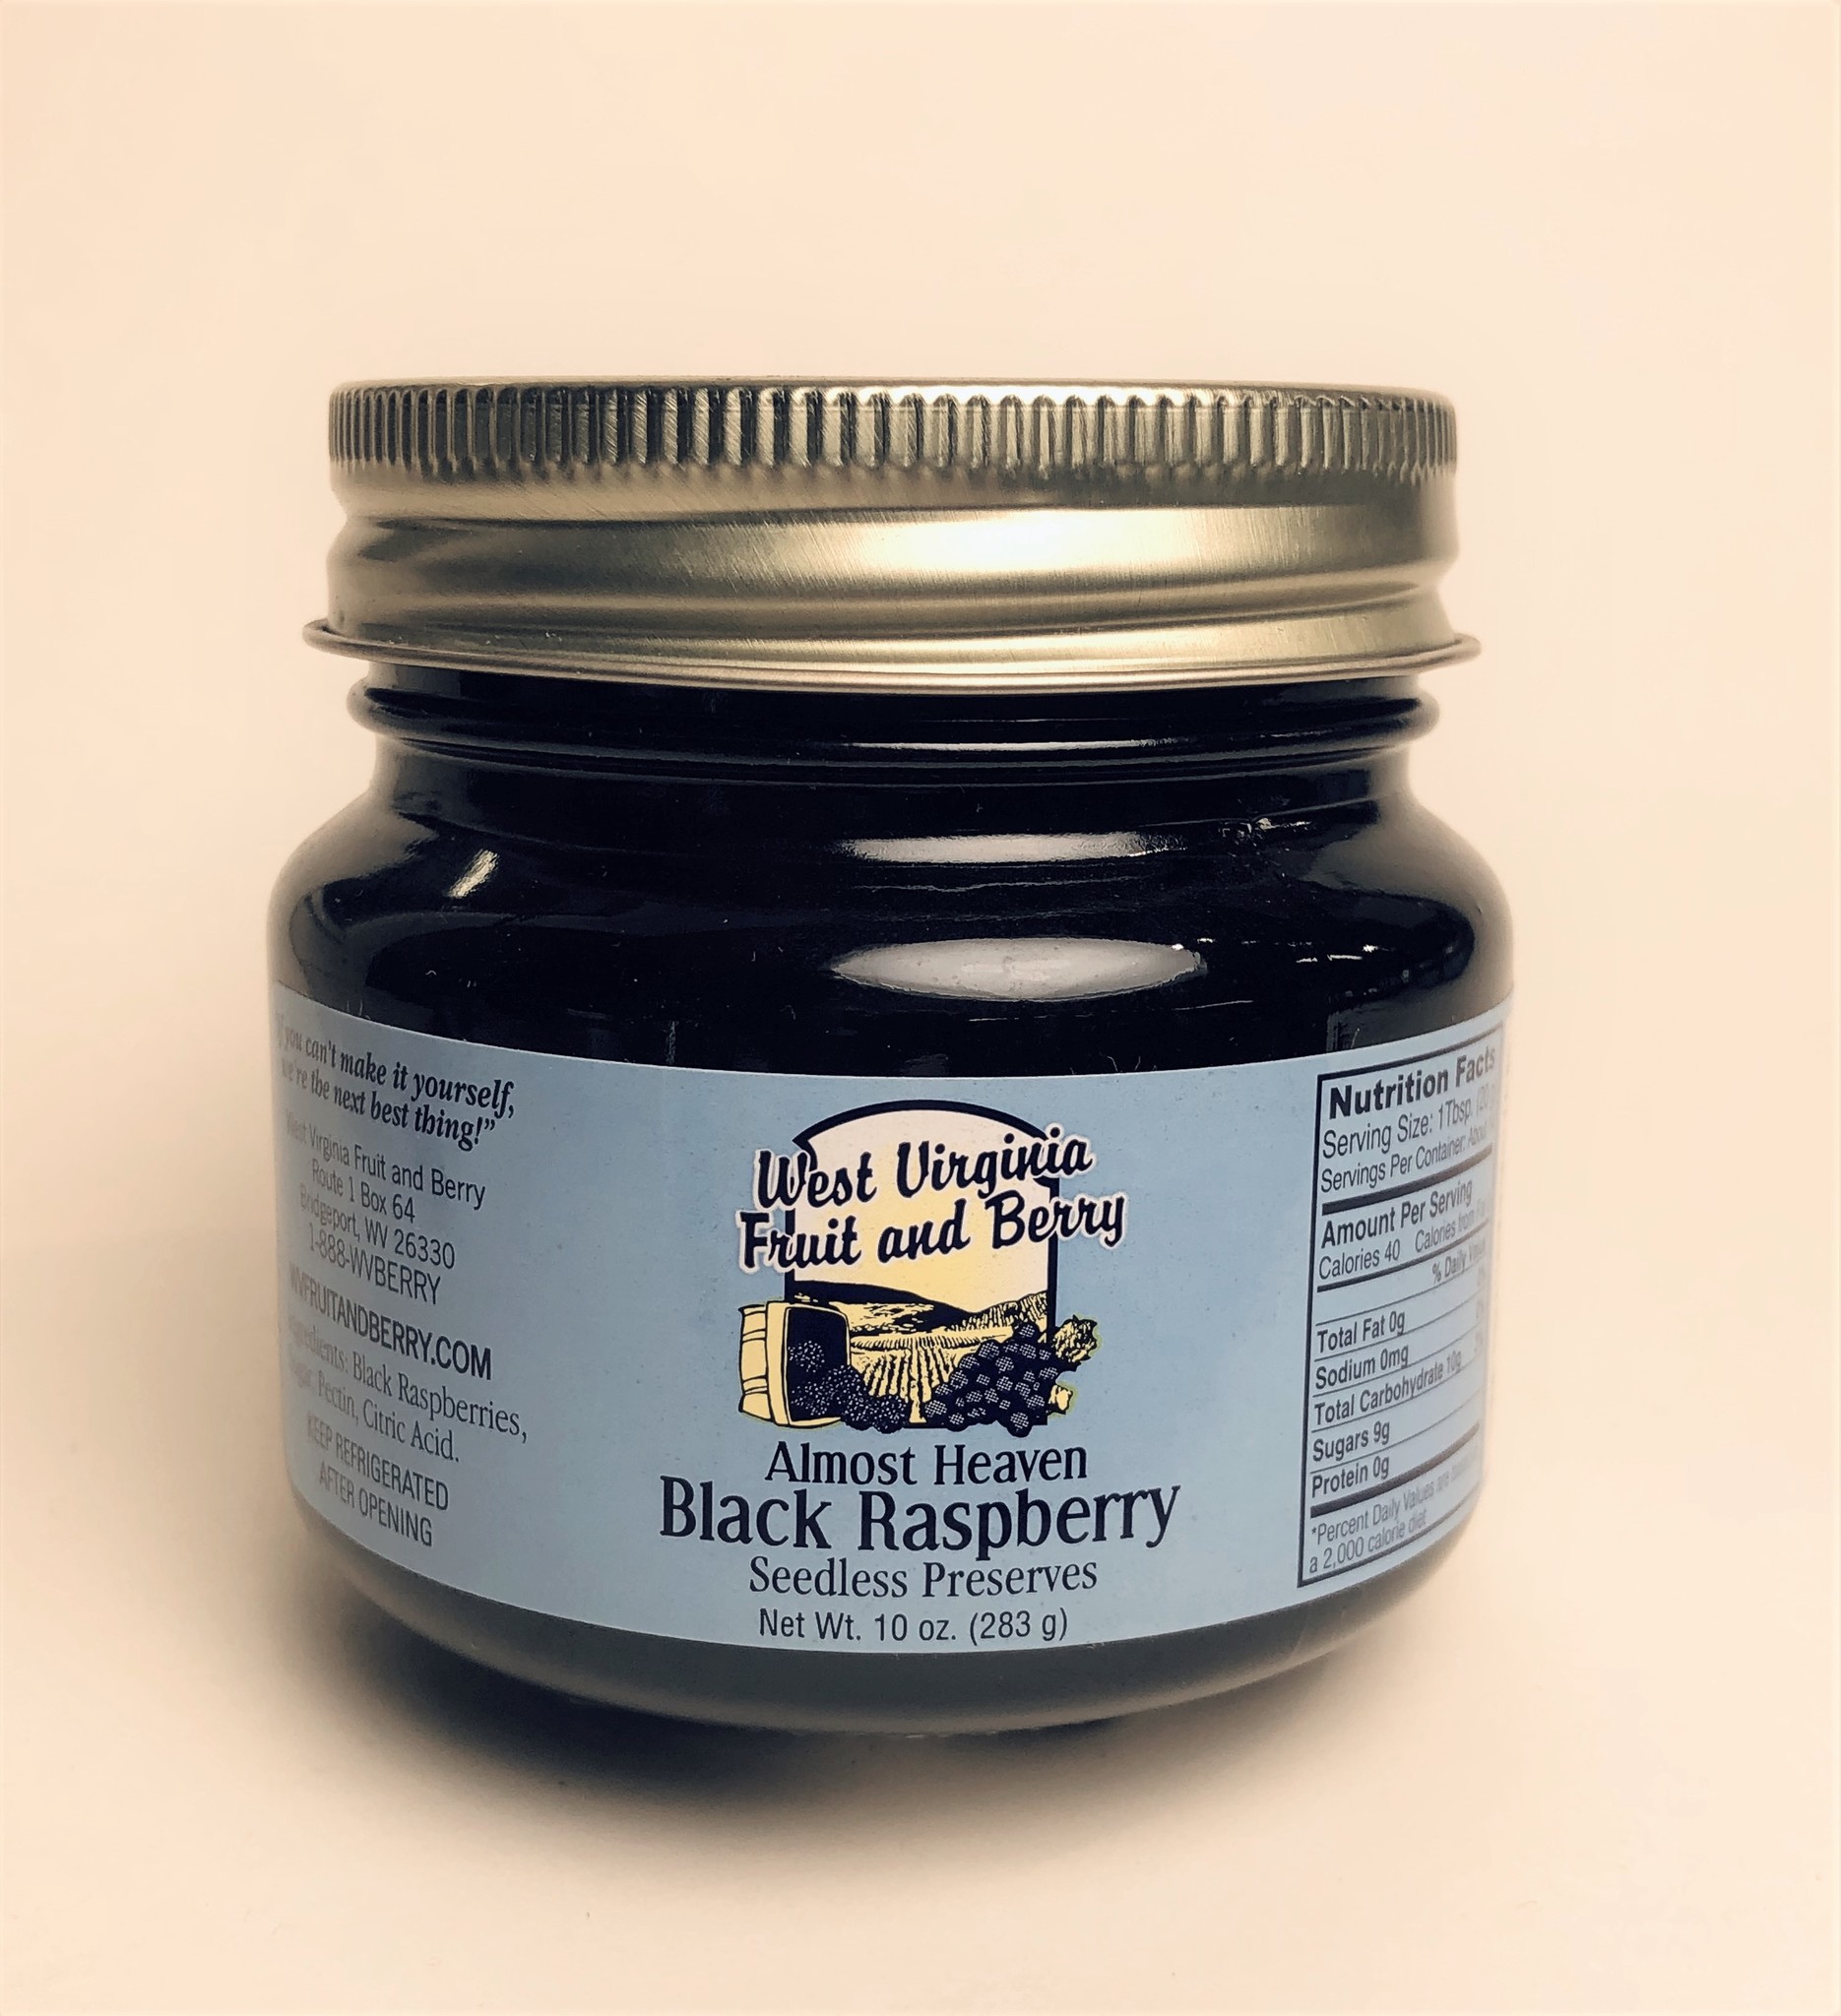 West Virginia Fruit and Berry WVF&B 10 oz. Mountain Blackberry Preserves